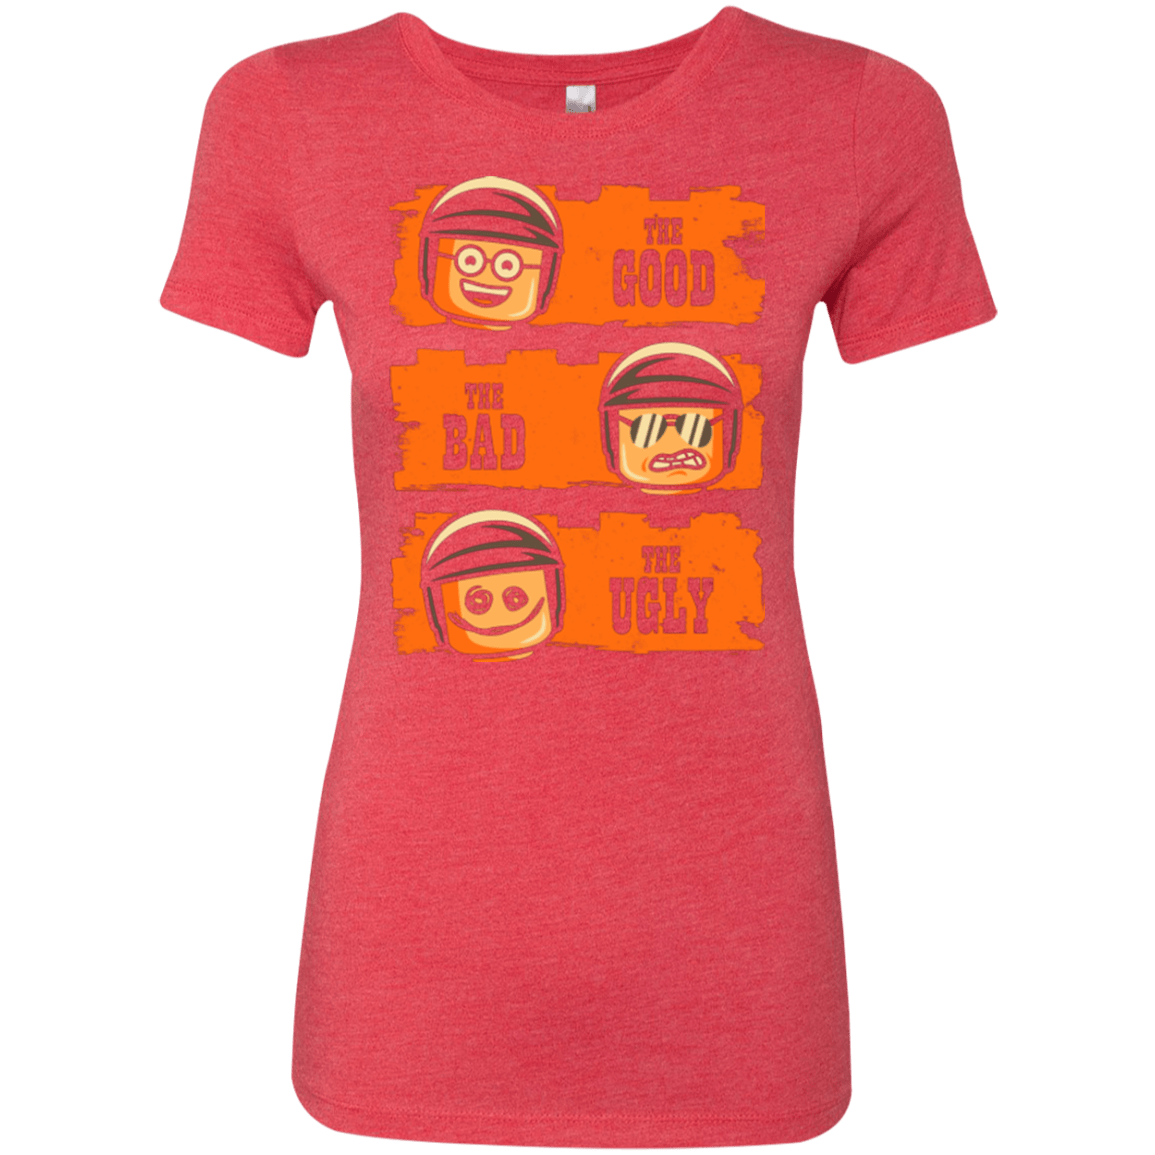 T-Shirts Vintage Red / Small GOOD COP BAD COP UGLY COP Women's Triblend T-Shirt